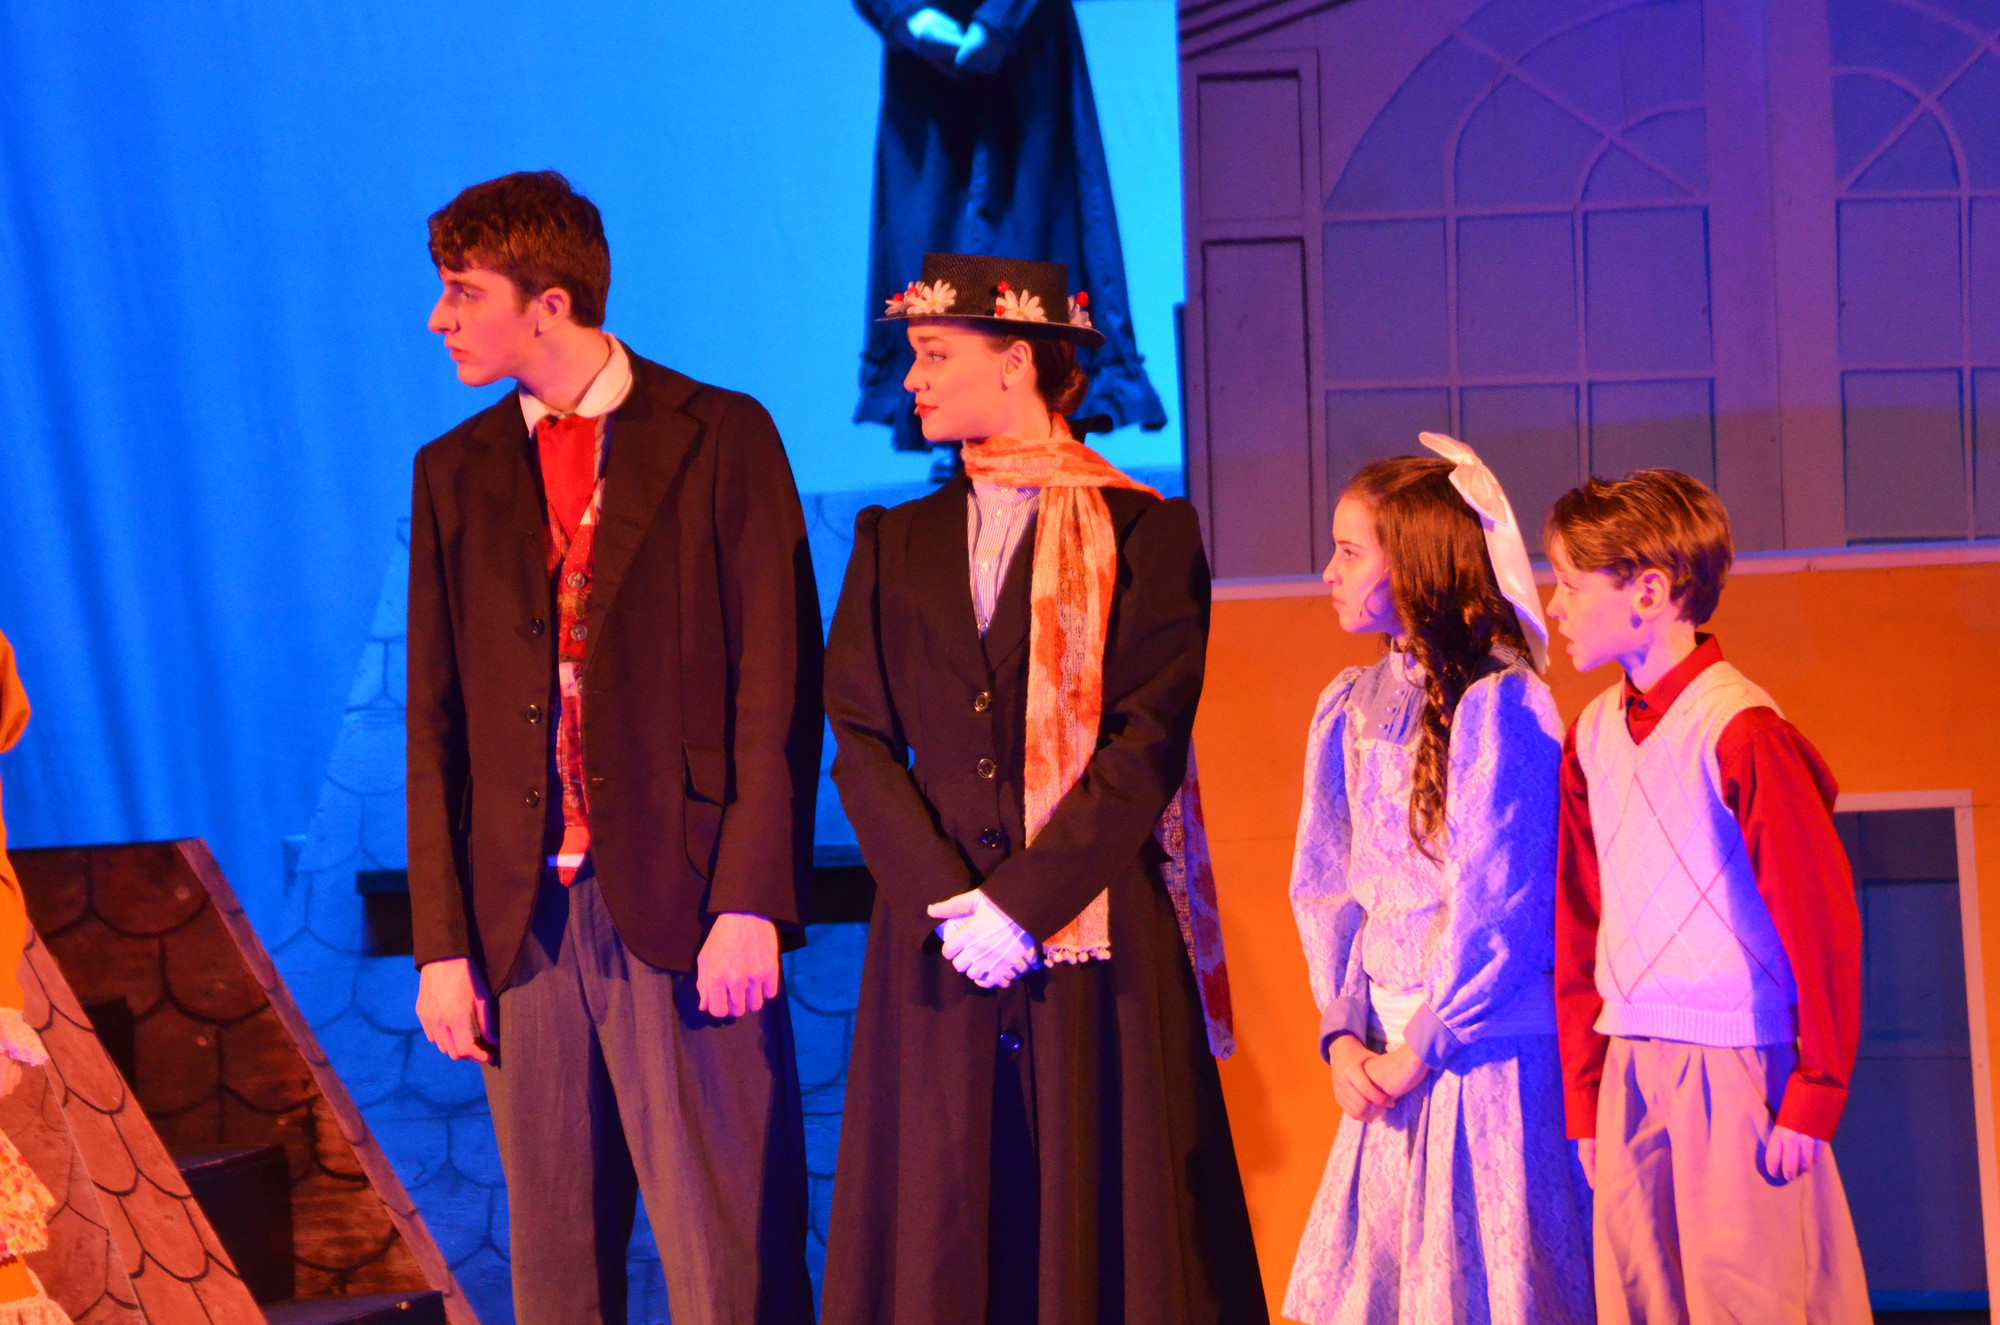 Bert played by Jack Neary, Mary Poppins played by Katharine Calabrese with Jane Banks played by Grace McNally and Michael Banks played by Brennan Donovan.